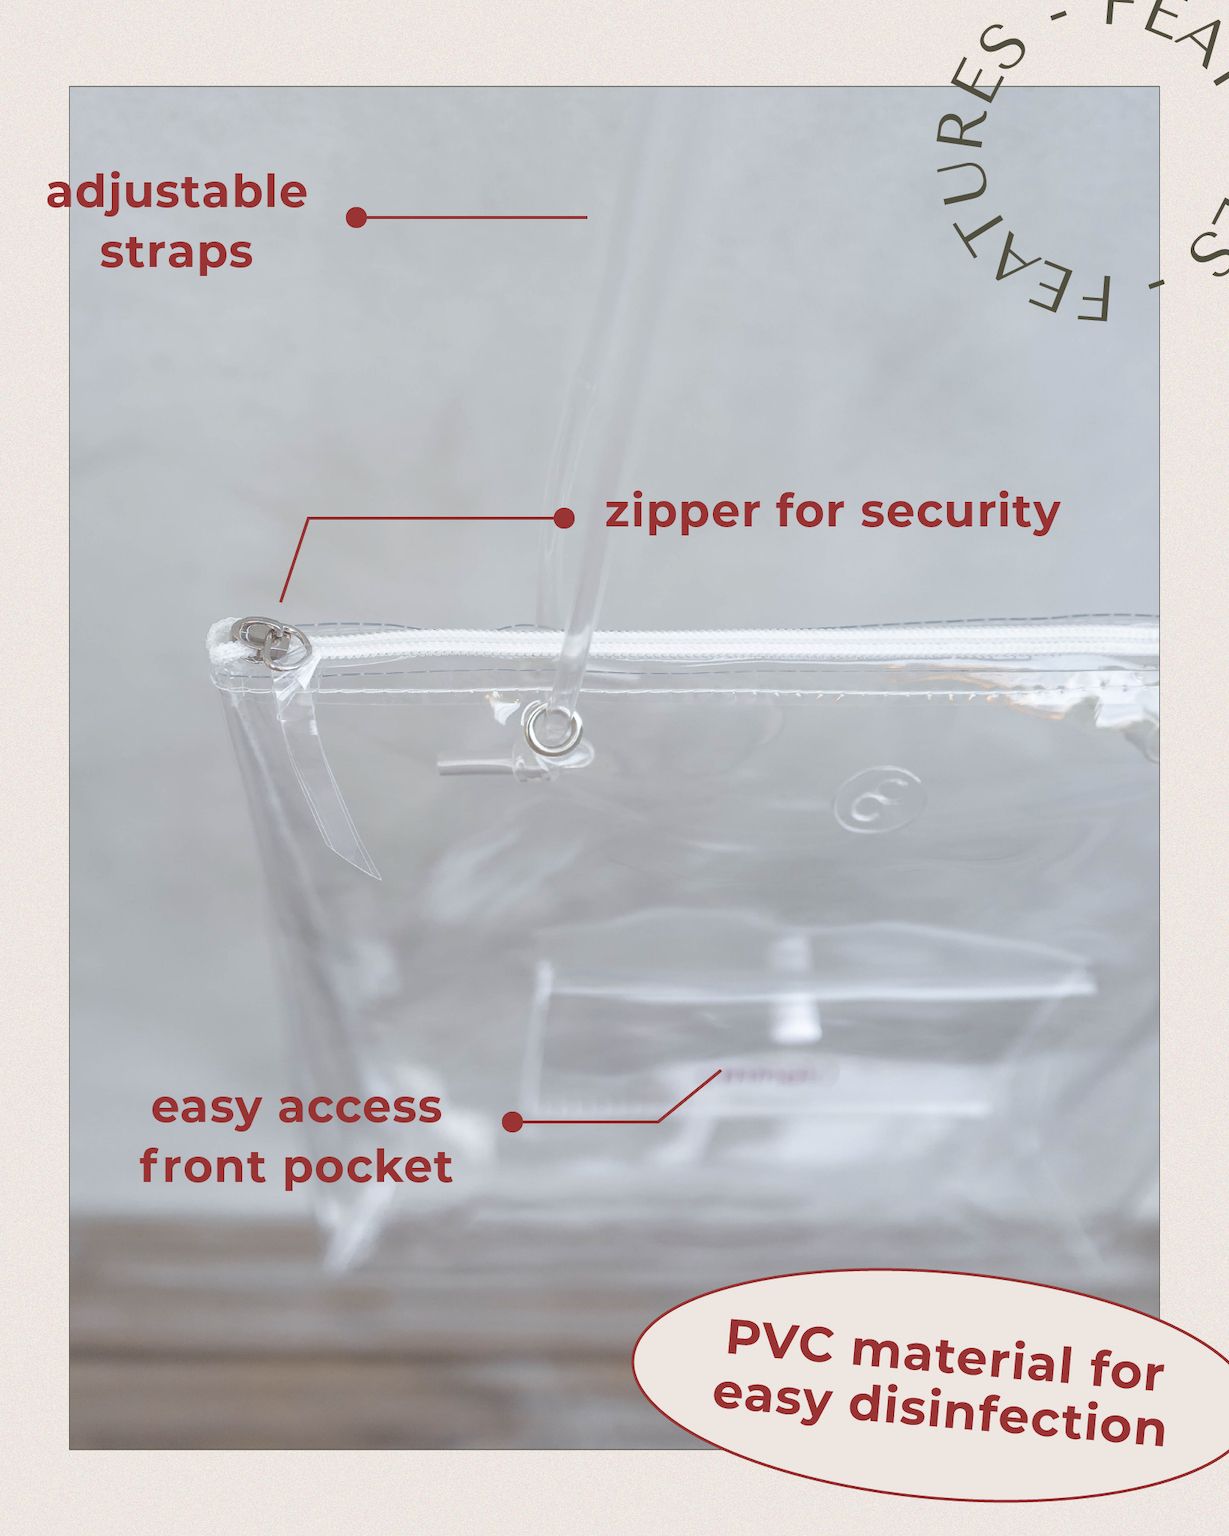 Clarity bag features